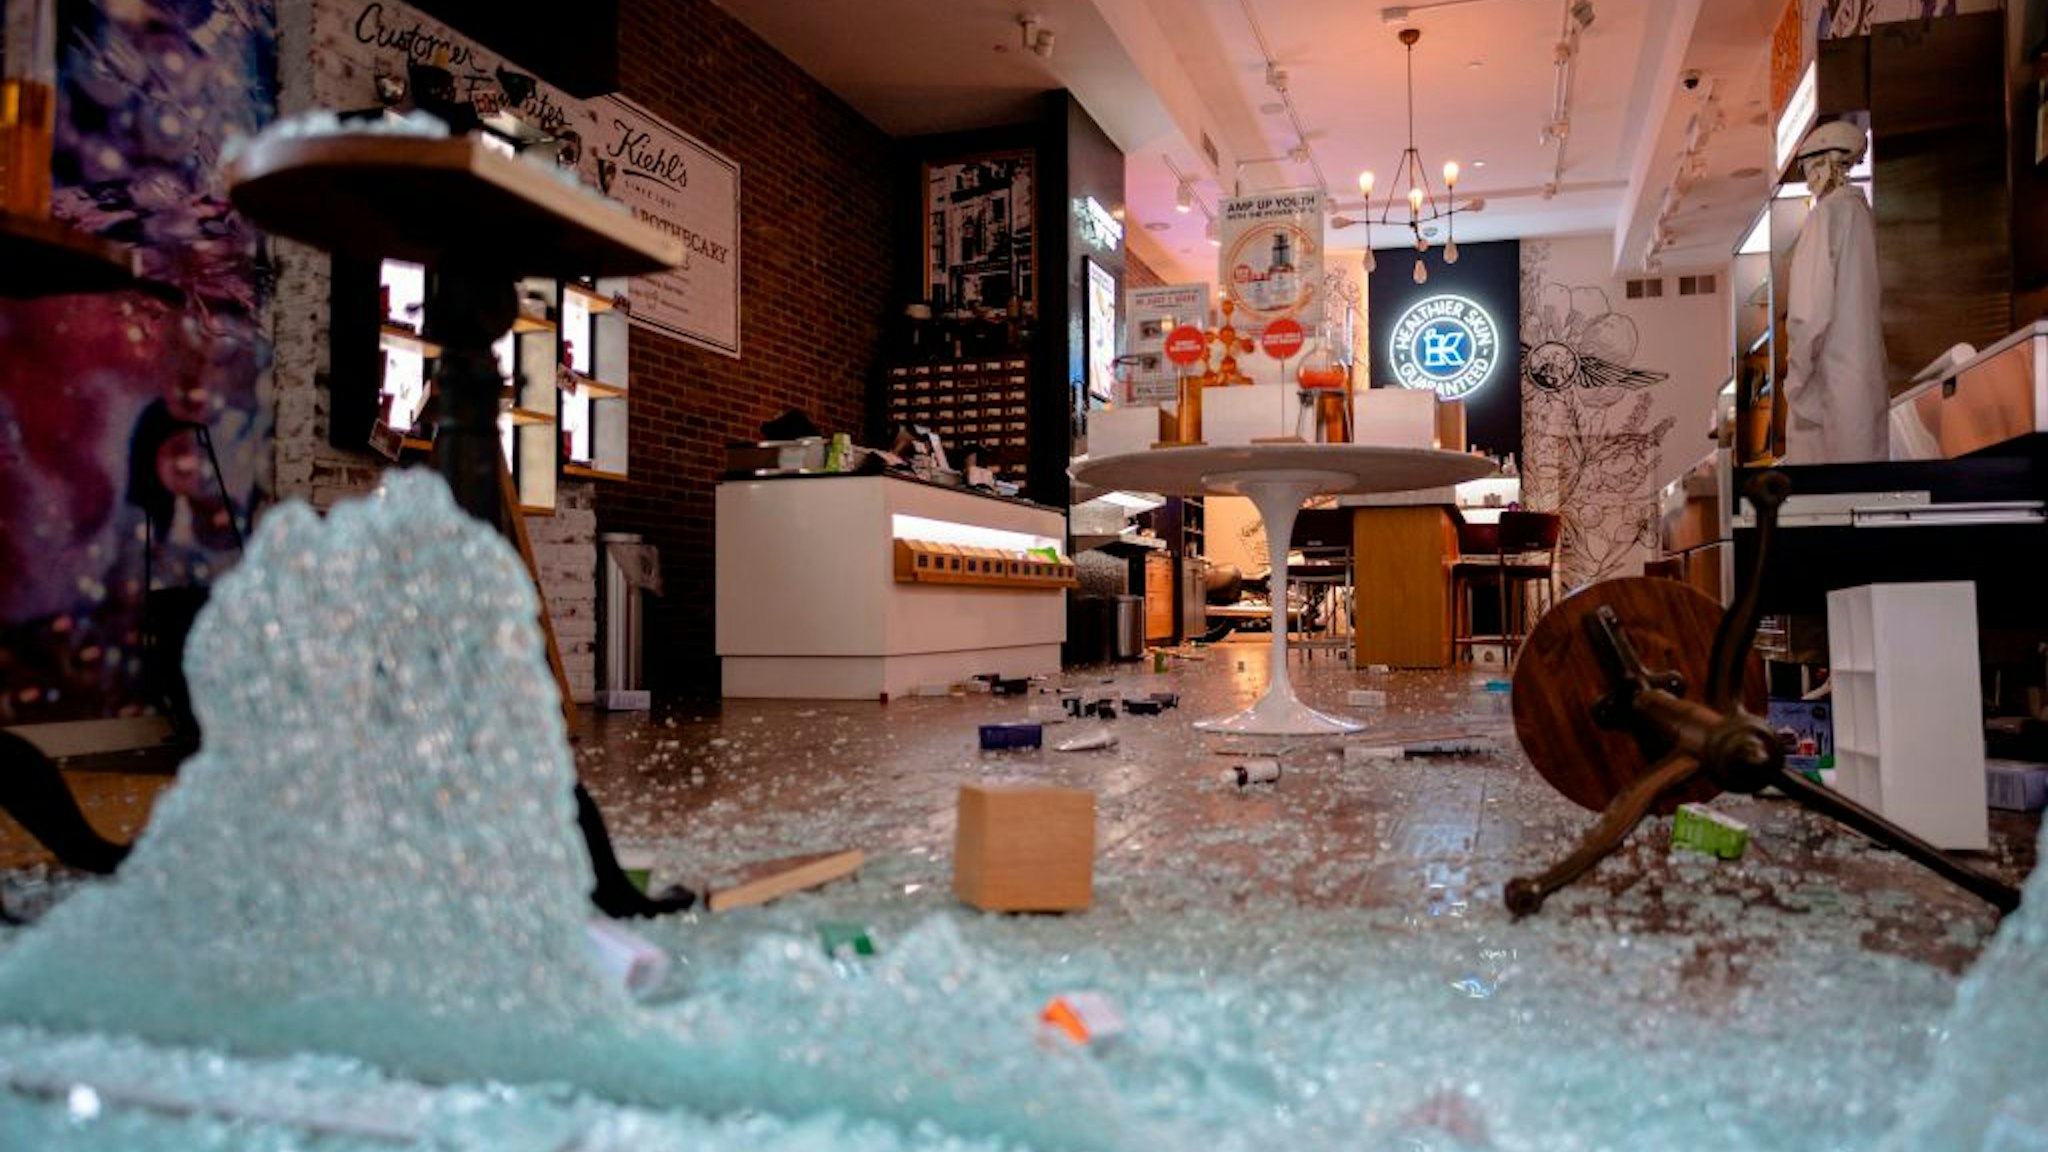 A looted and destroyed shop is seen after a night of protest over the death of African-American man George Floyd in Minneapolis on June 1, 2020 in Lower Manhattan in New York City. -